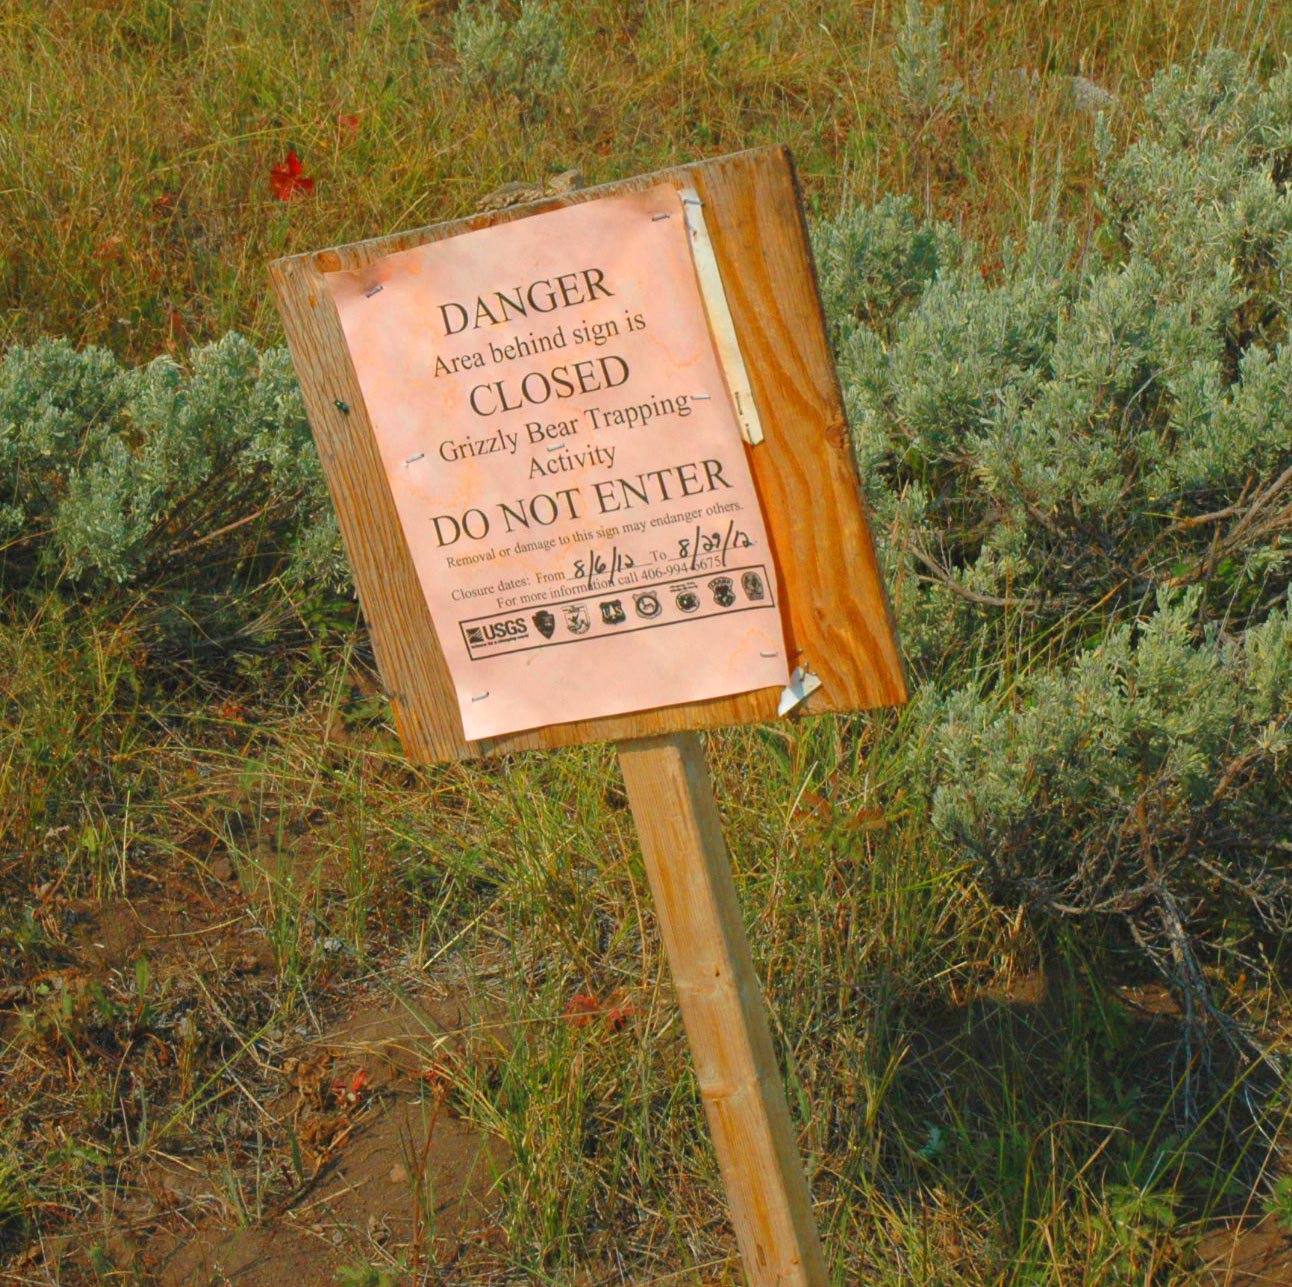 Grizzly bear trapping warning sign